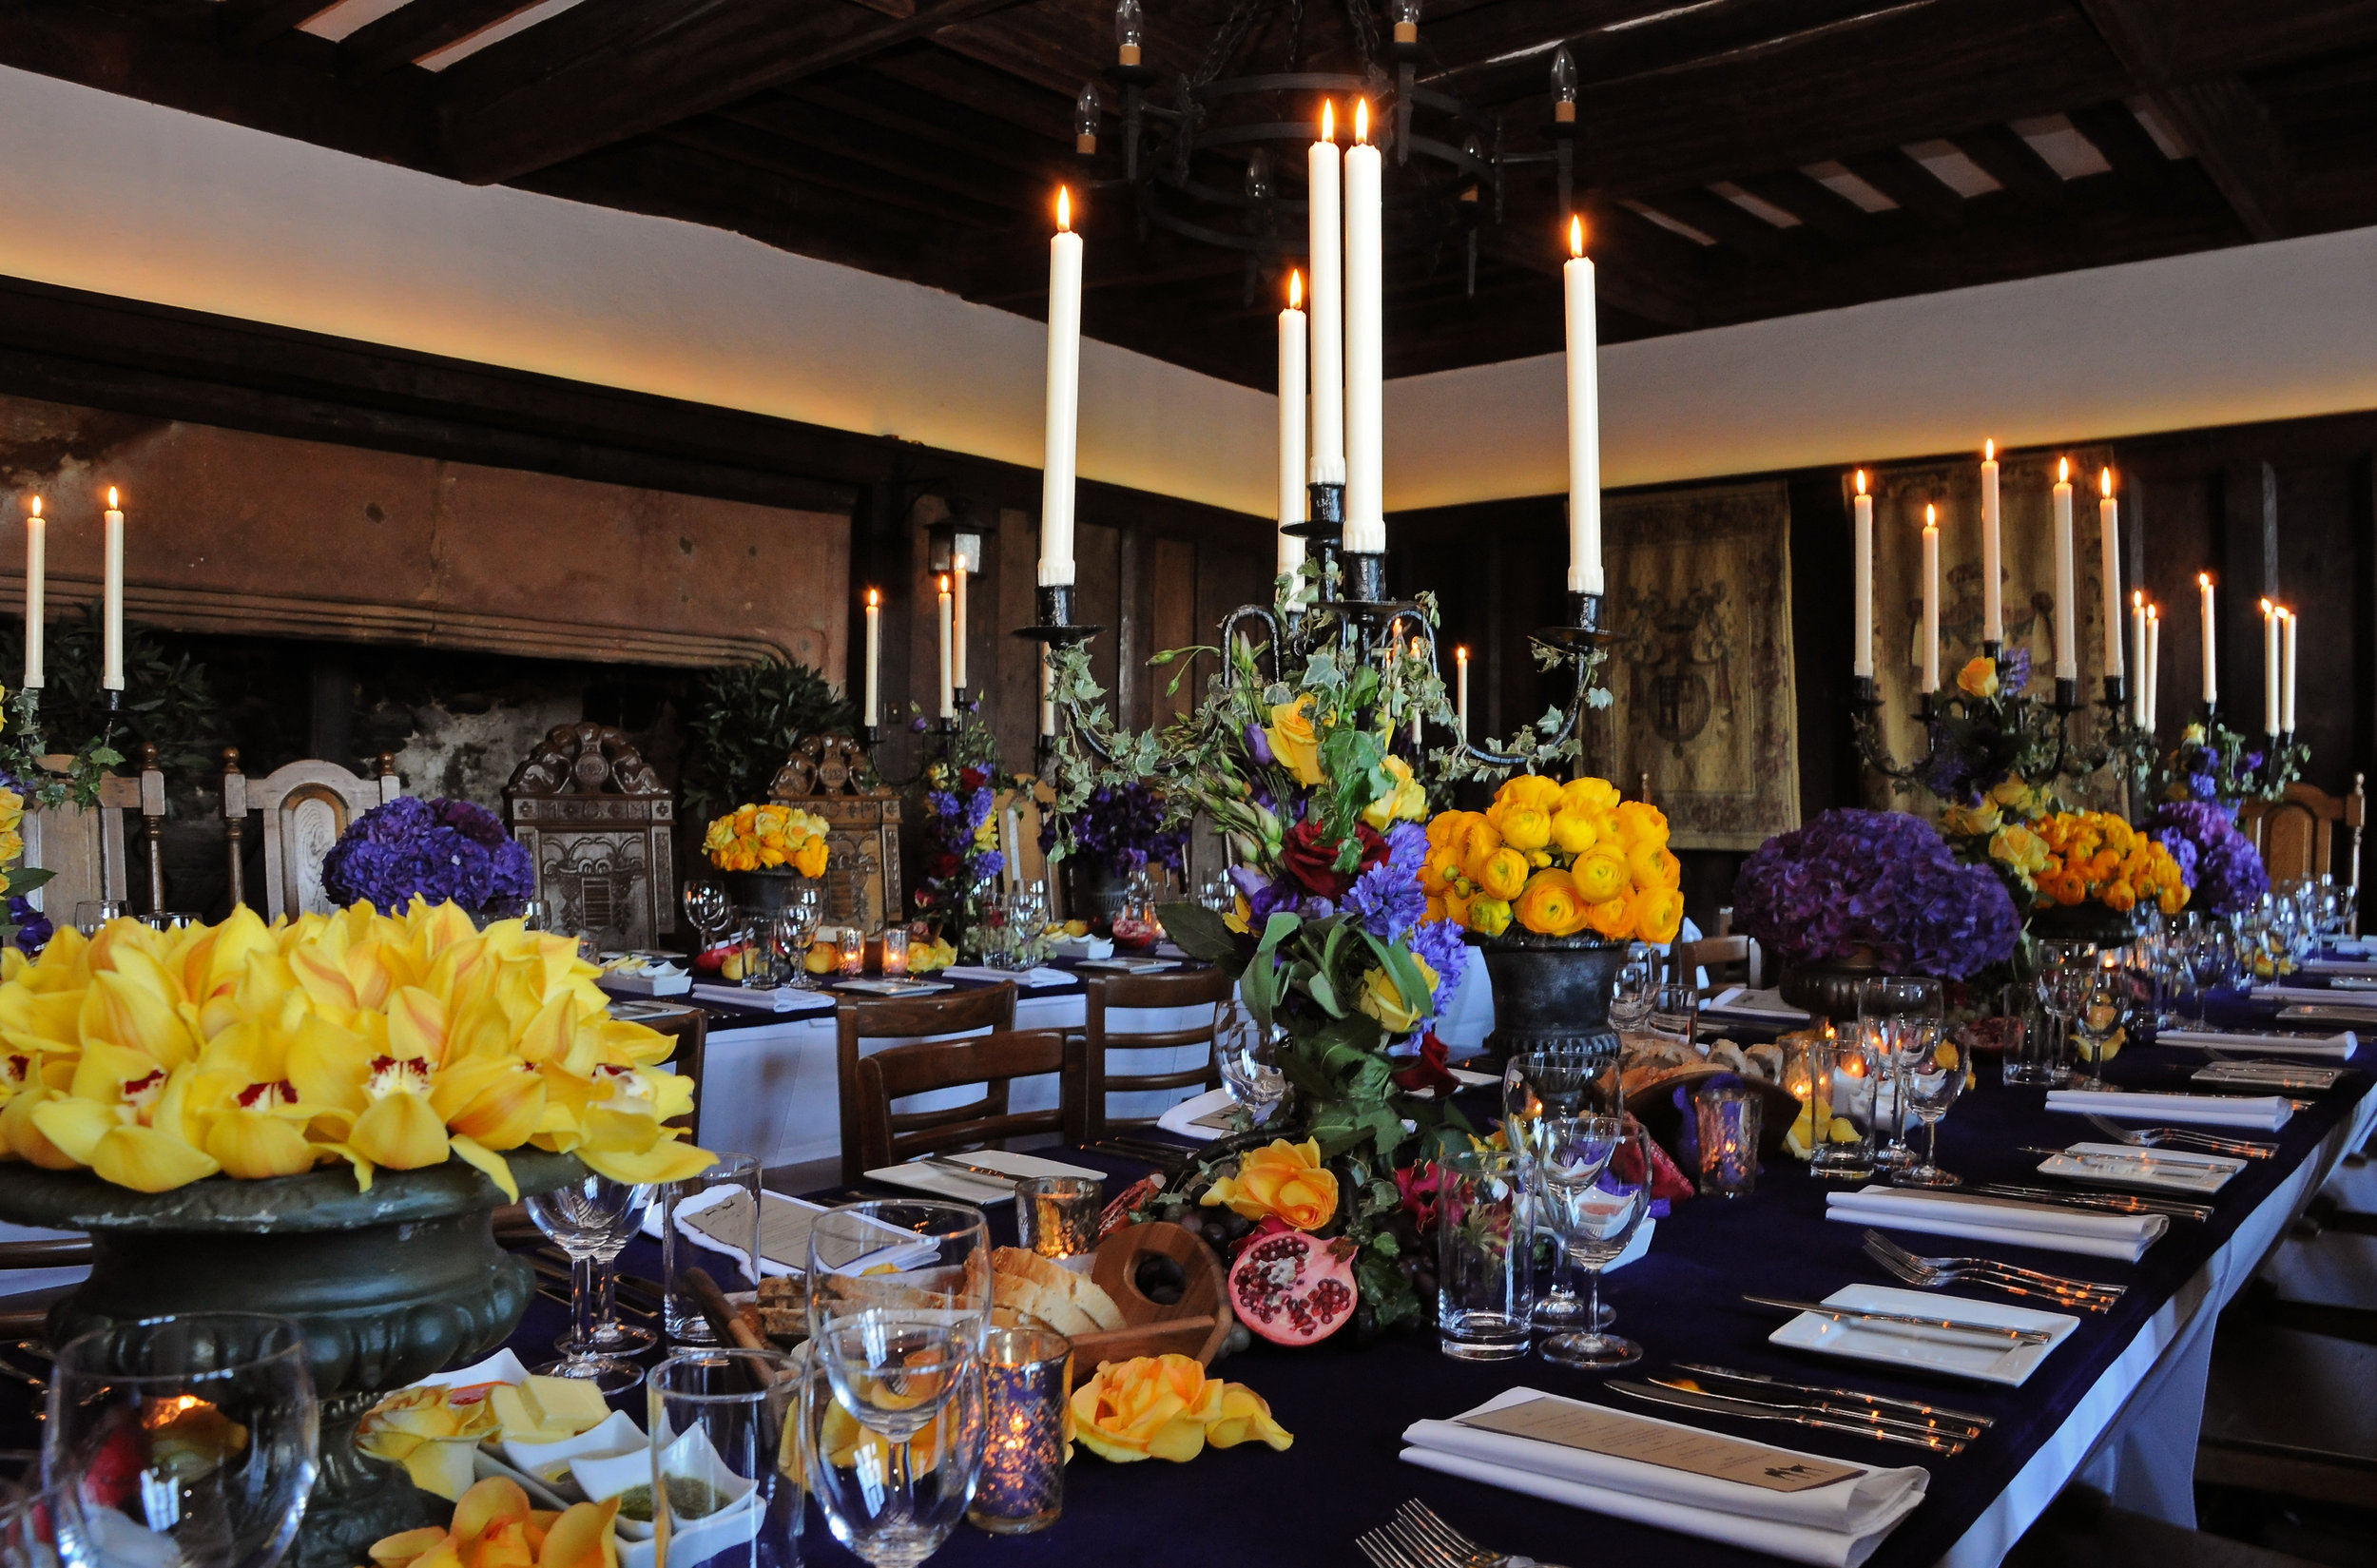 Banqueting Hall - flowers,candles.JPG